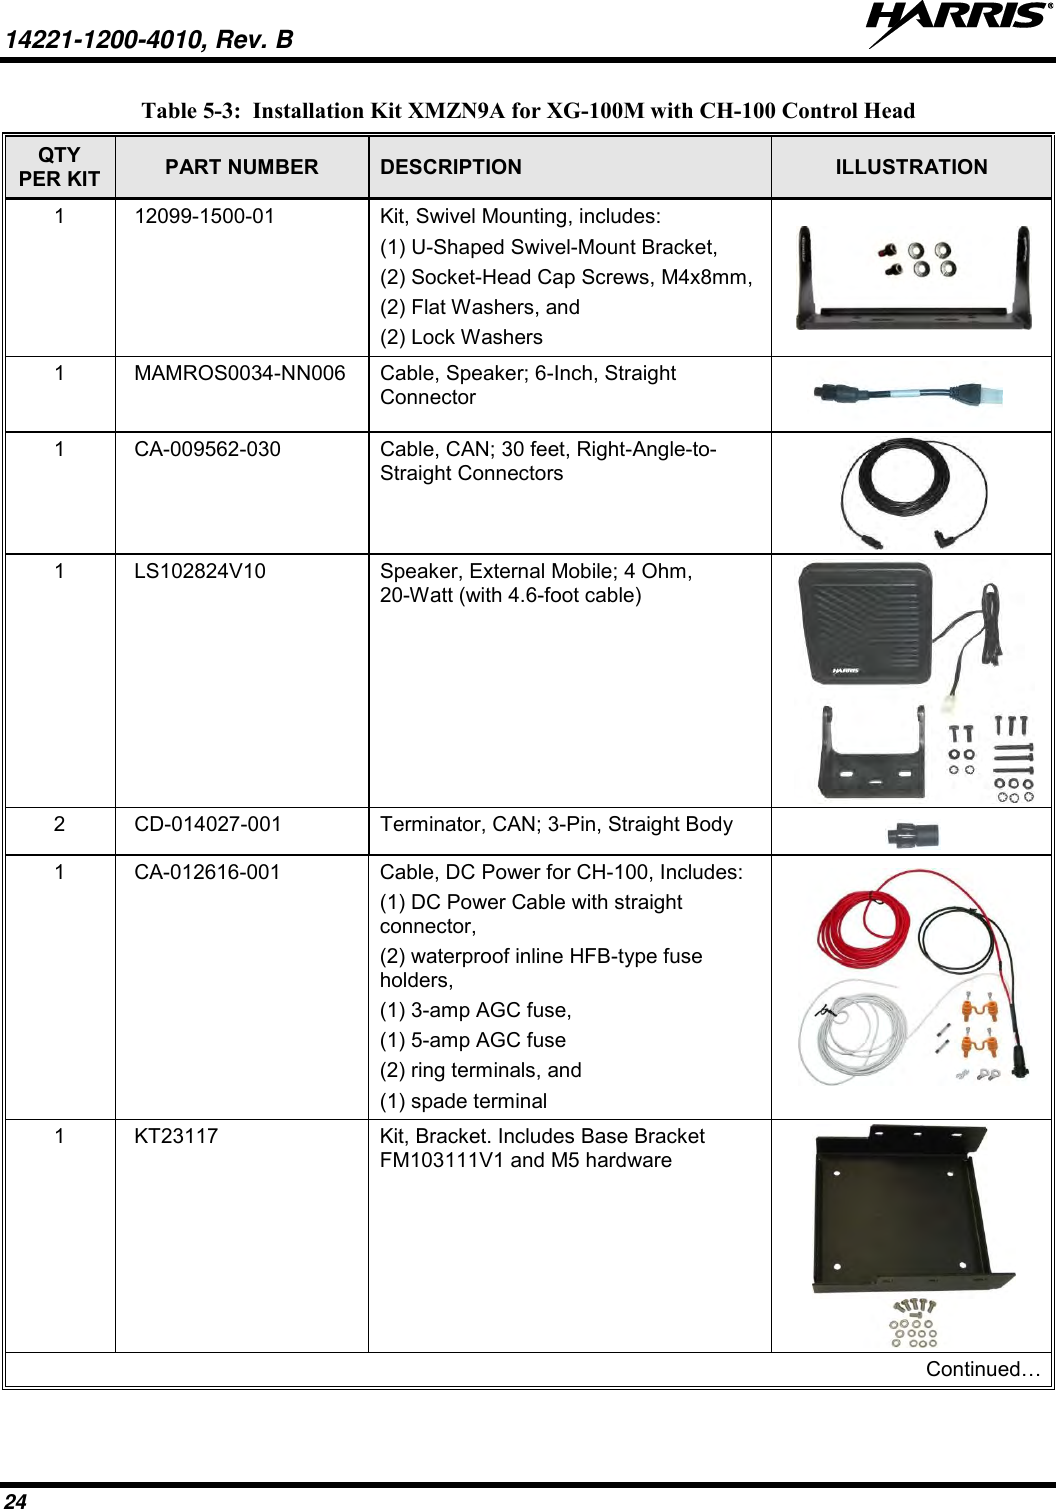 14221-1200-4010, Rev. B   24 Table 5-3:  Installation Kit XMZN9A for XG-100M with CH-100 Control Head QTY PER KIT PART NUMBER DESCRIPTION ILLUSTRATION 1 12099-1500-01 Kit, Swivel Mounting, includes: (1) U-Shaped Swivel-Mount Bracket,  (2) Socket-Head Cap Screws, M4x8mm,  (2) Flat Washers, and  (2) Lock Washers  1 MAMROS0034-NN006 Cable, Speaker; 6-Inch, Straight Connector  1 CA-009562-030 Cable, CAN; 30 feet, Right-Angle-to-Straight Connectors  1 LS102824V10 Speaker, External Mobile; 4 Ohm, 20-Watt (with 4.6-foot cable)  2 CD-014027-001 Terminator, CAN; 3-Pin, Straight Body  1 CA-012616-001 Cable, DC Power for CH-100, Includes:  (1) DC Power Cable with straight connector,  (2) waterproof inline HFB-type fuse holders,  (1) 3-amp AGC fuse,  (1) 5-amp AGC fuse (2) ring terminals, and (1) spade terminal  1 KT23117 Kit, Bracket. Includes Base Bracket FM103111V1 and M5 hardware  Continued… 